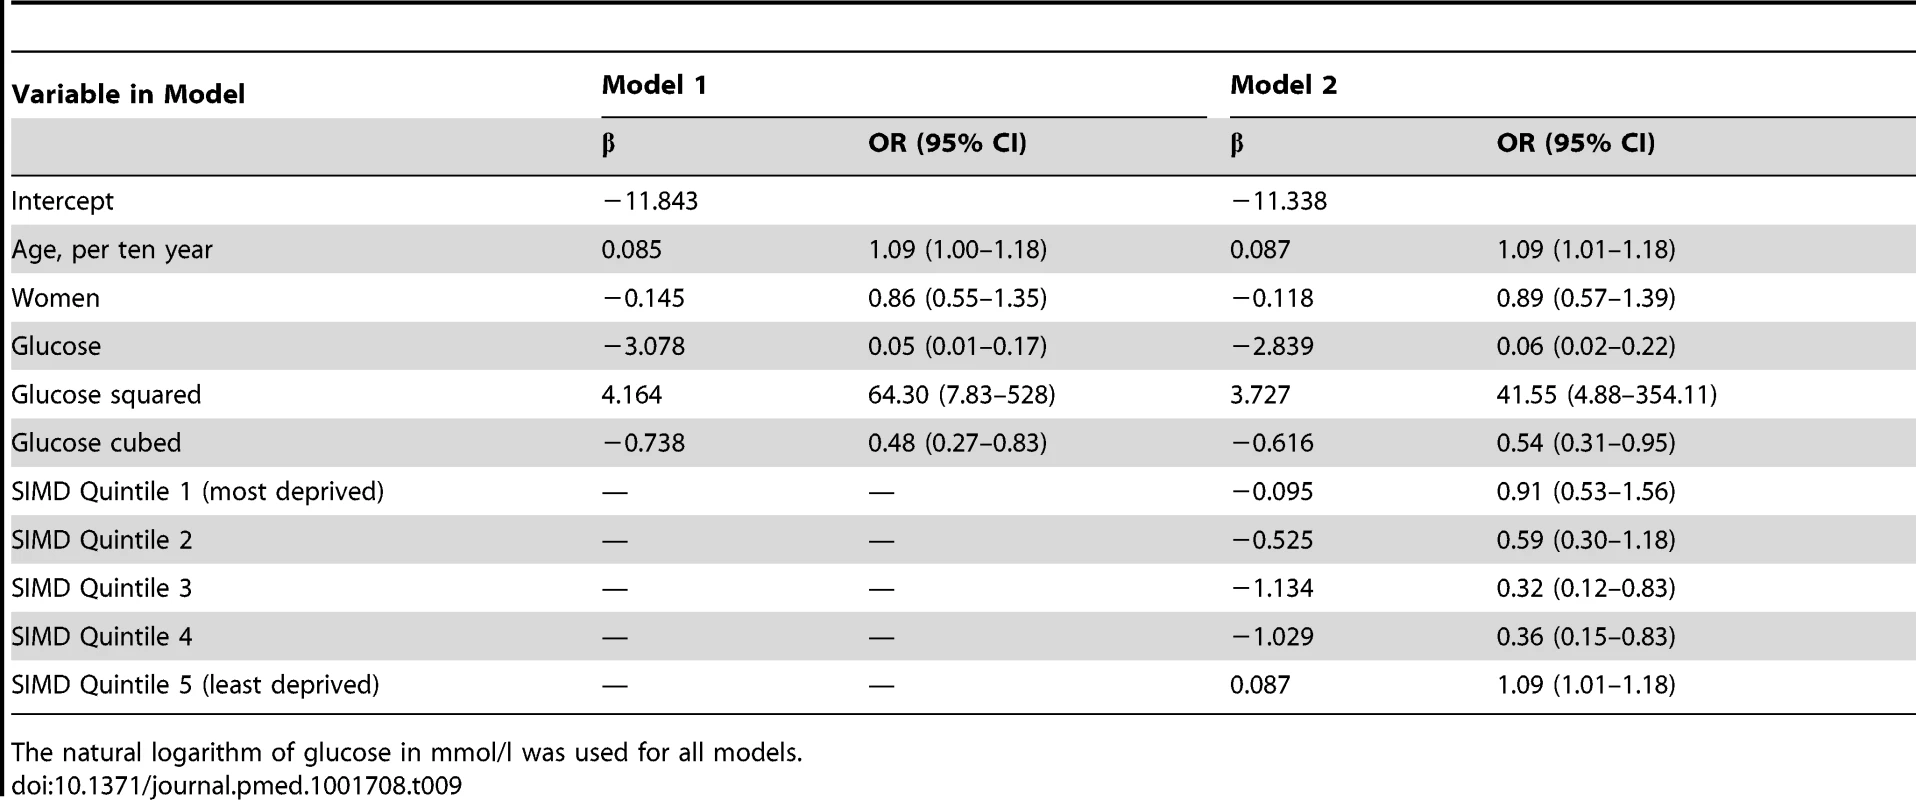 3-year risk of type 2 diabetes by glucose, age, sex, and Scottish Index of Multiple Deprivation (SIMD) score: coefficients and odds ratios from logistic regression models for patients aged 30–39.